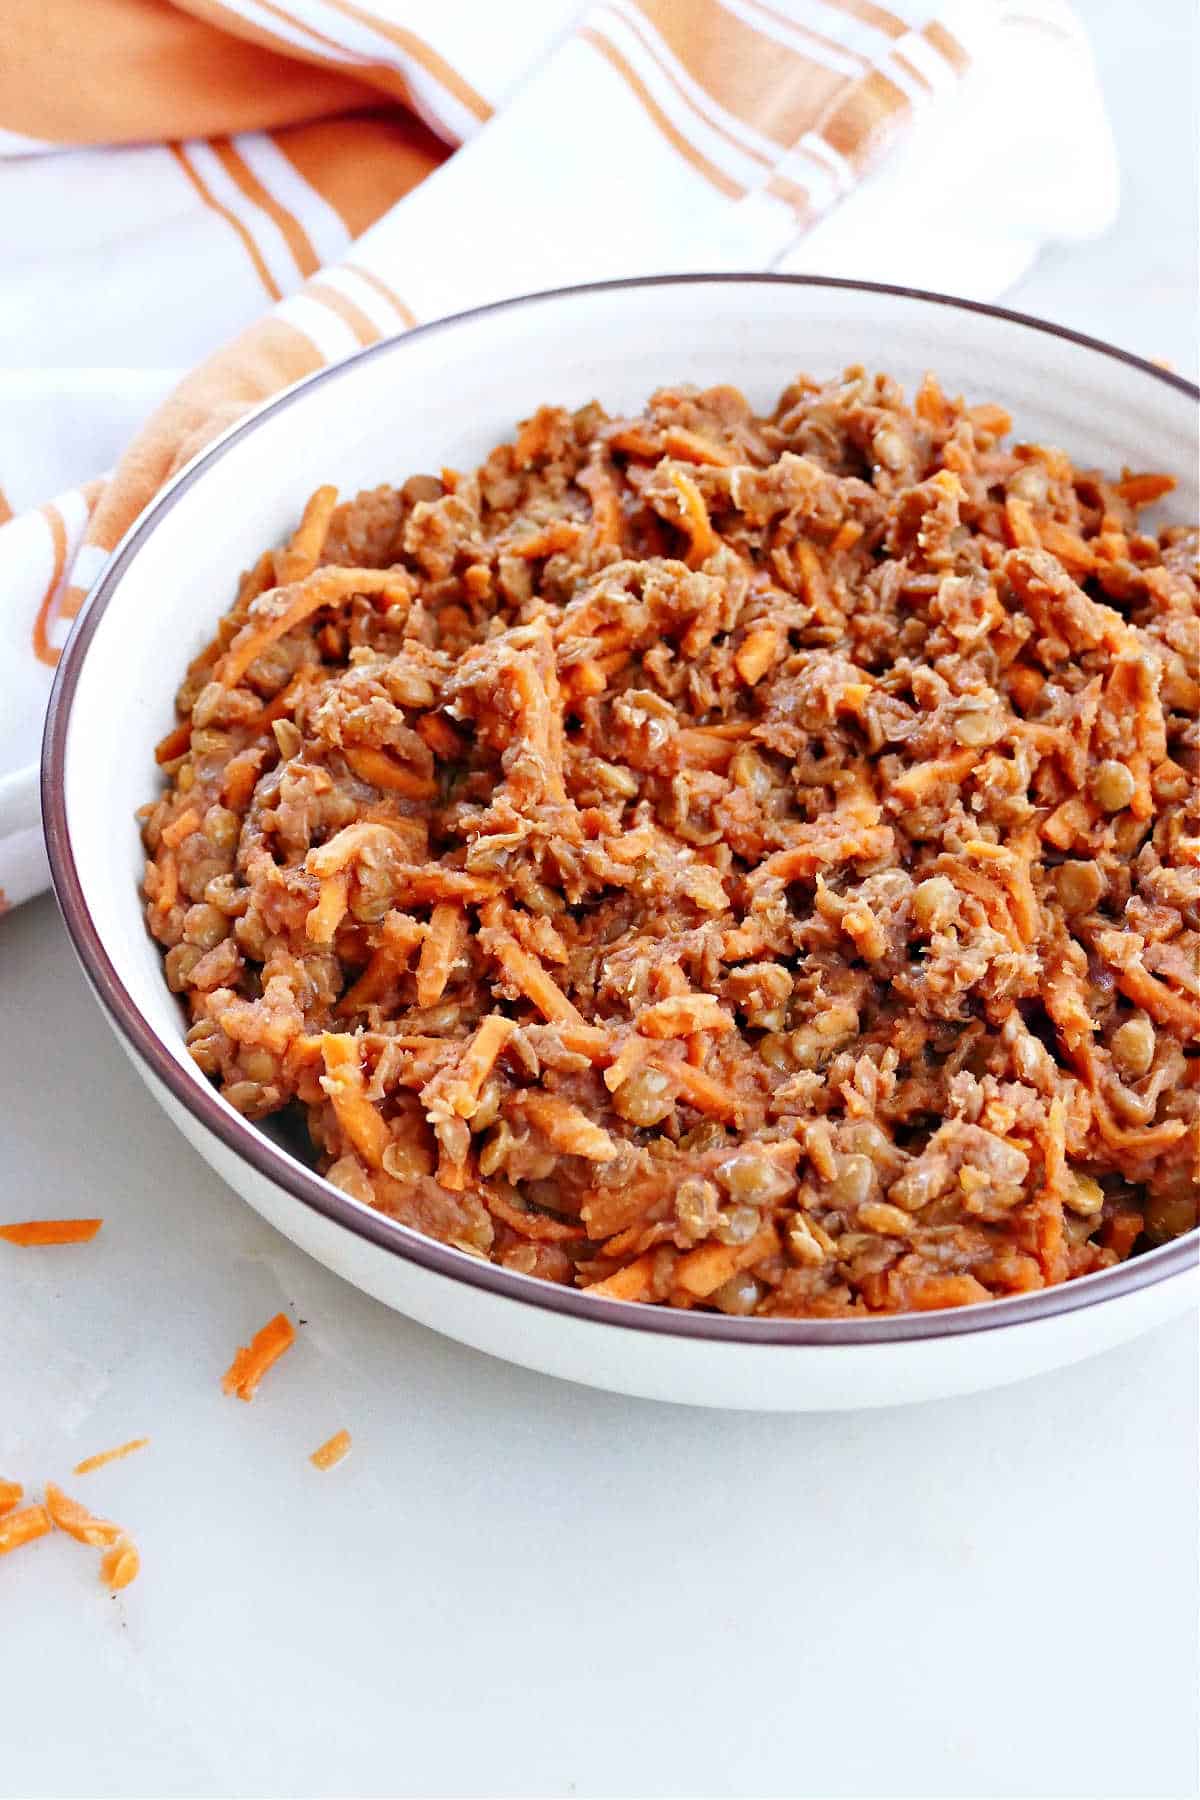 BBQ lentils with shredded carrots